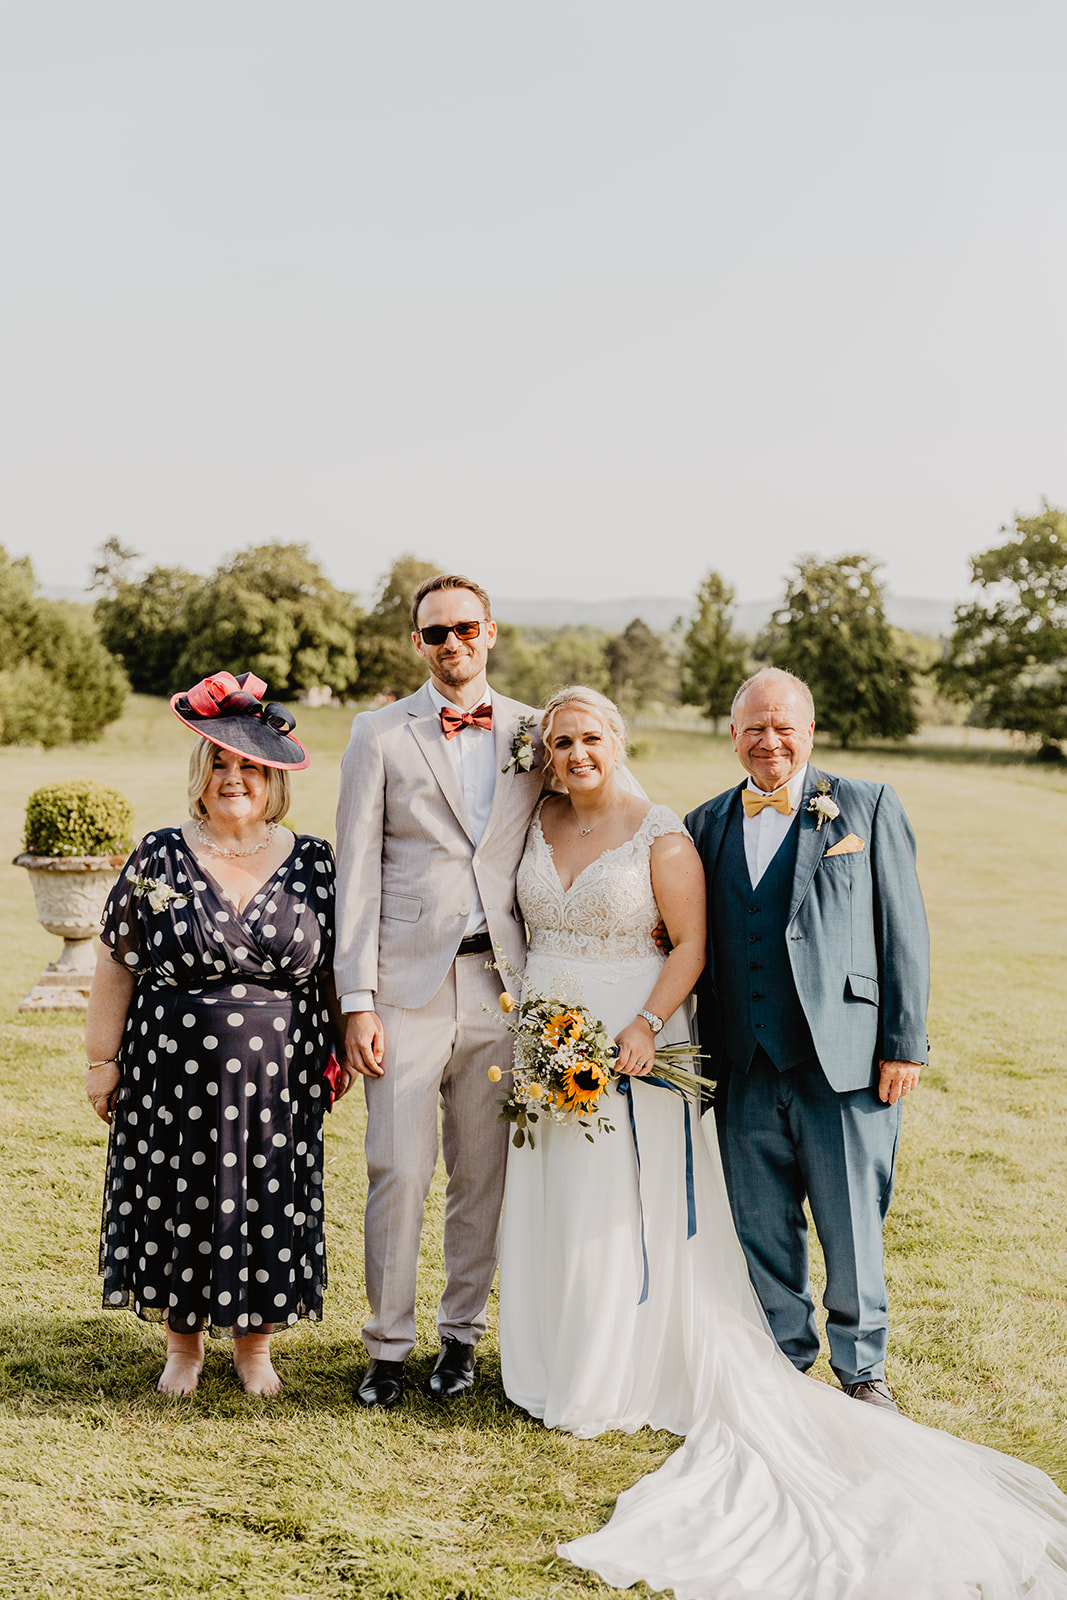 Bride, groom and family photos at a South Lodge, Sussex Wedding. By Olive Joy Photography